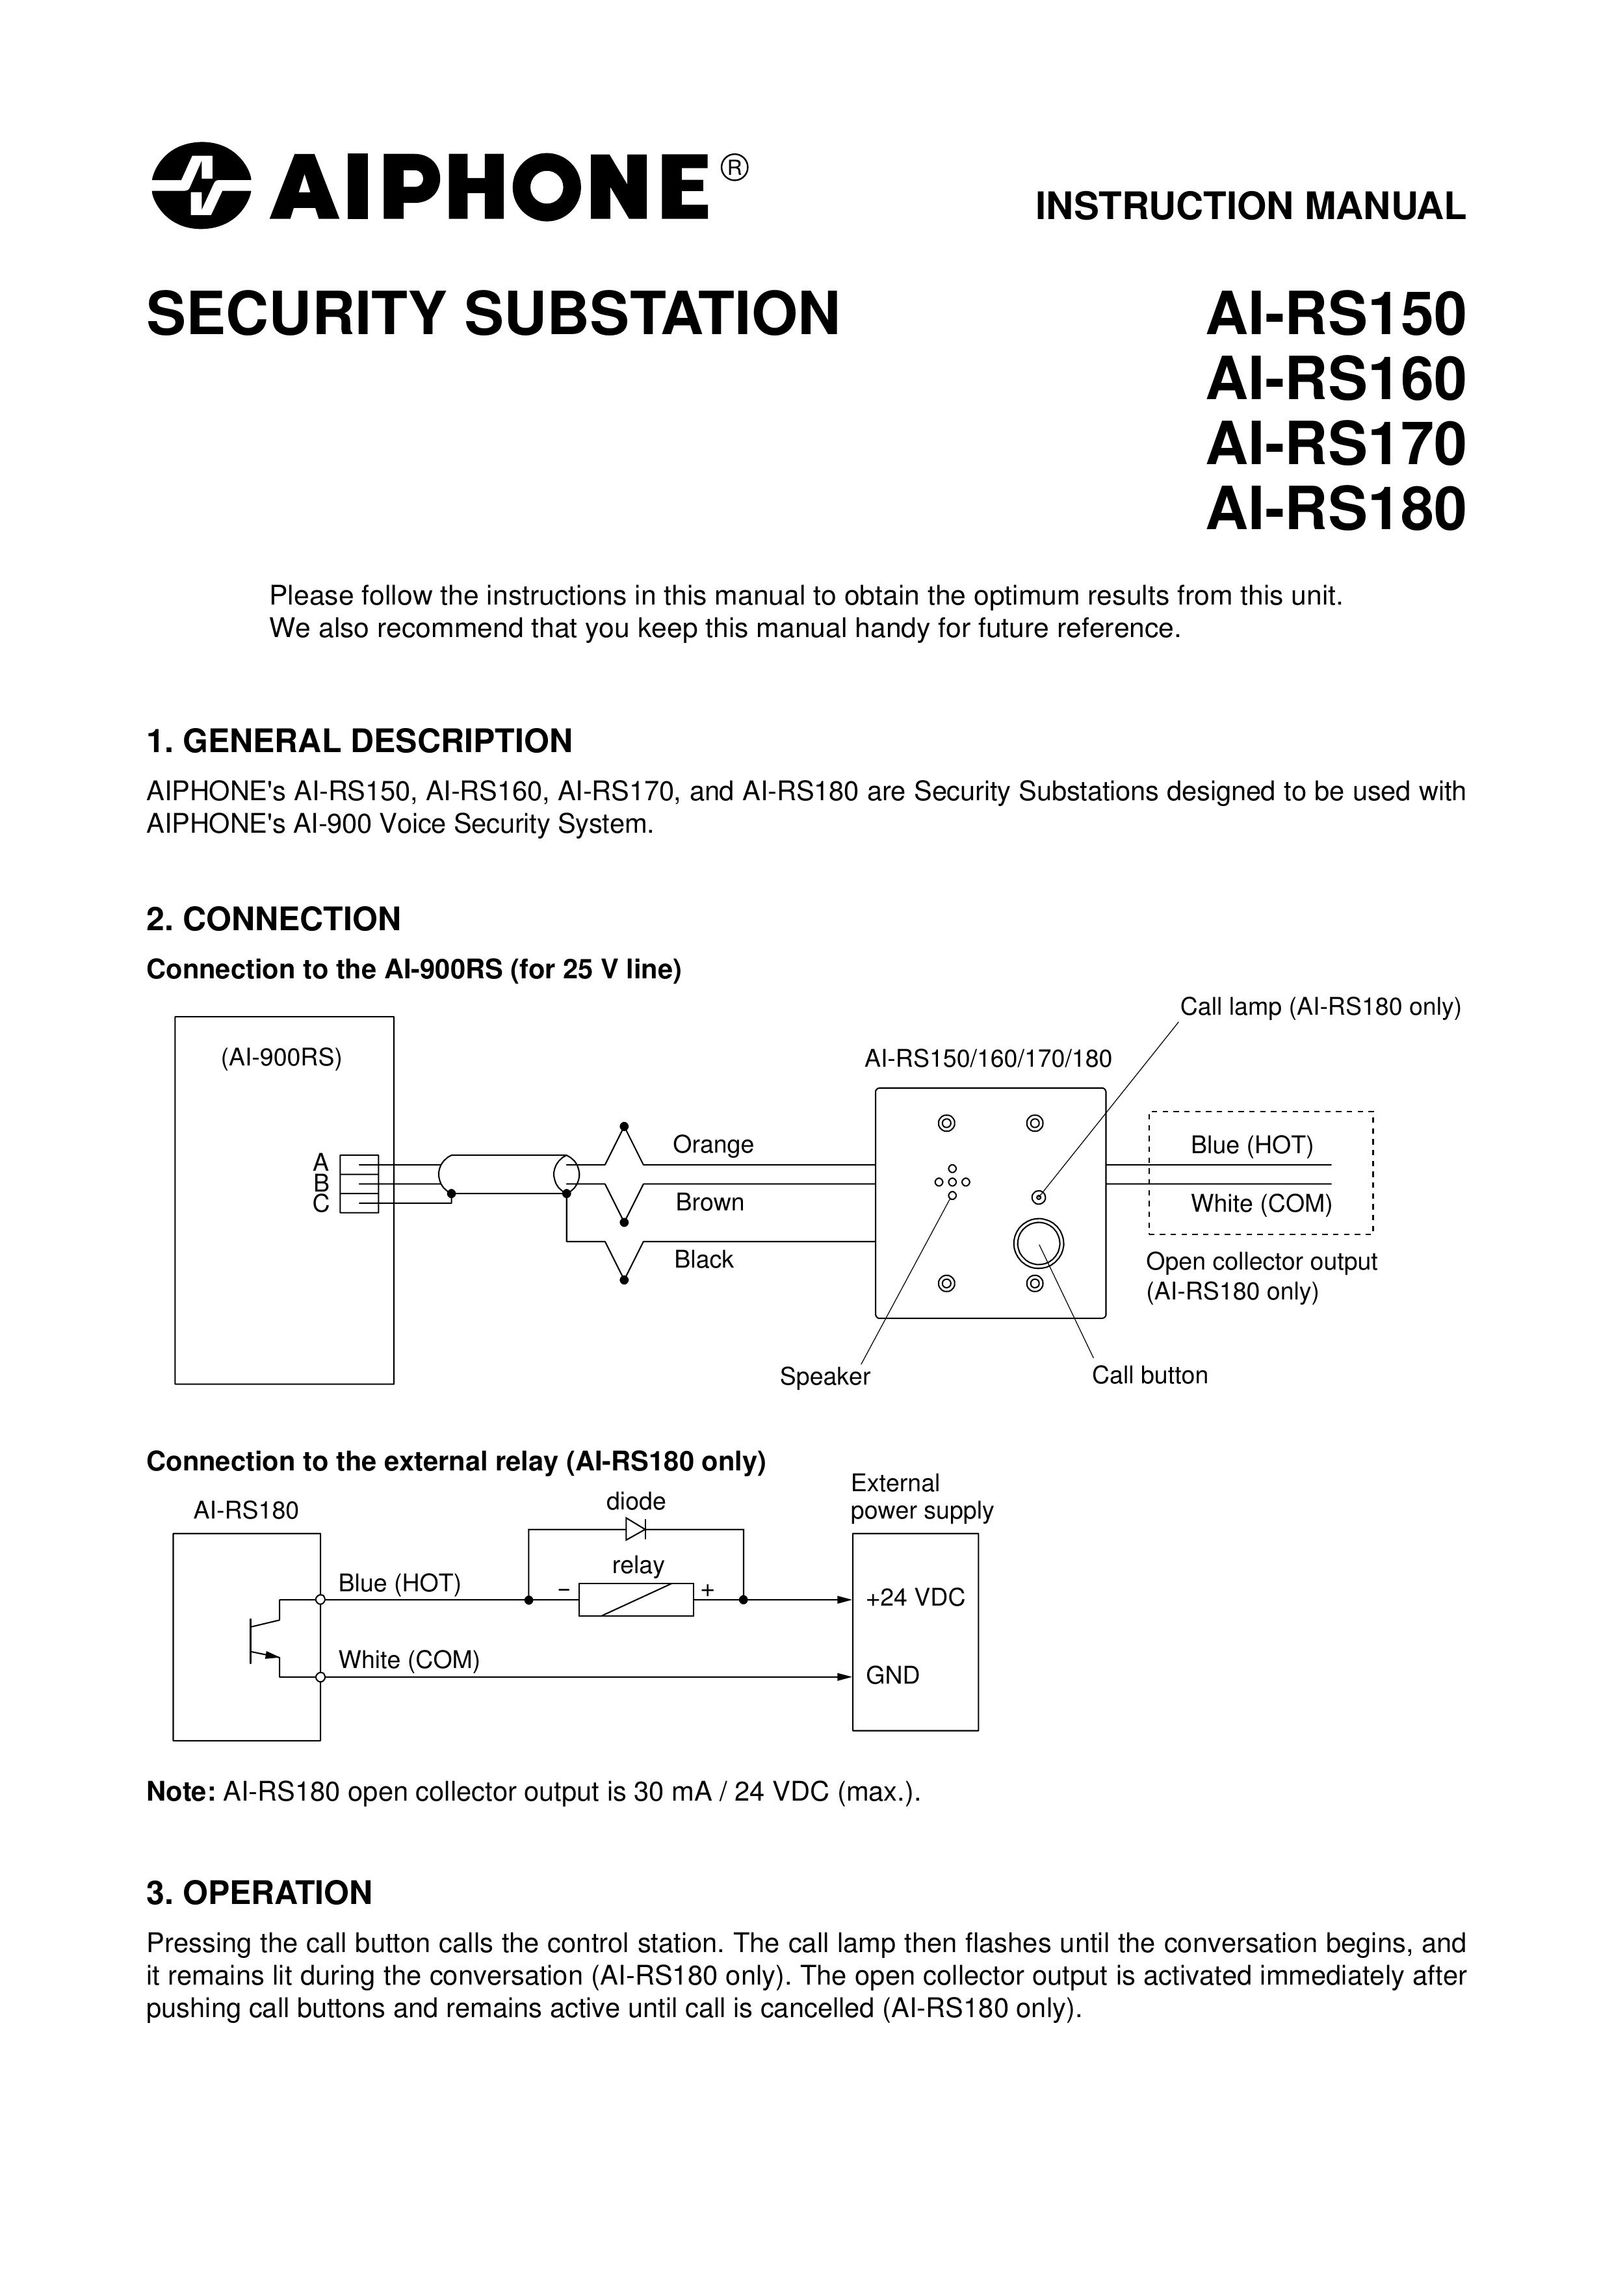 Aiphone AI-RS170 Home Security System User Manual